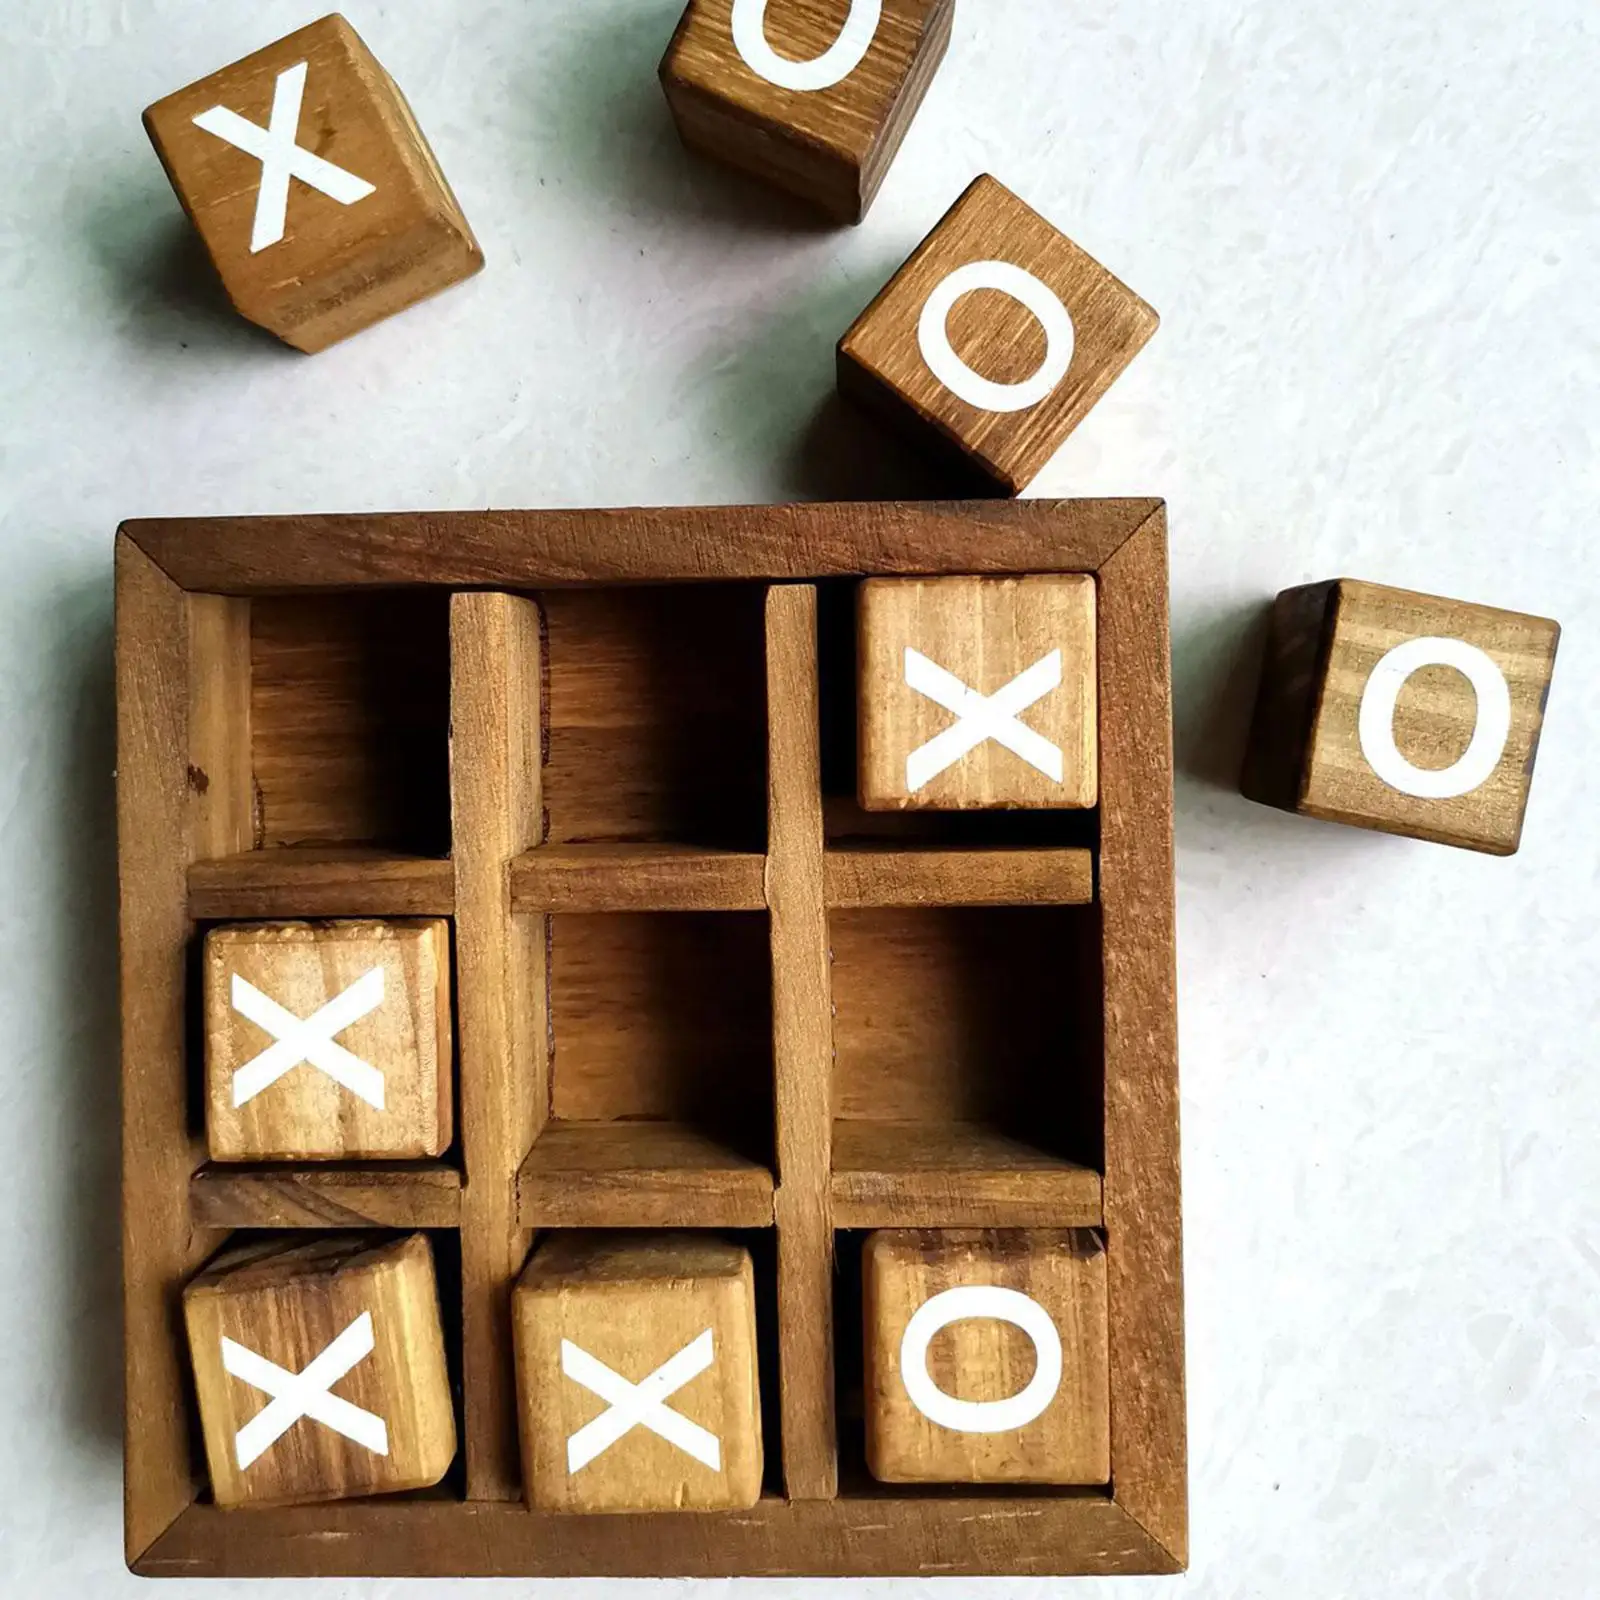 Wooden Tic TAC Toe Game Board Games Party Favor Fun Indoor Brain Teaser Travel for Friends Living Room